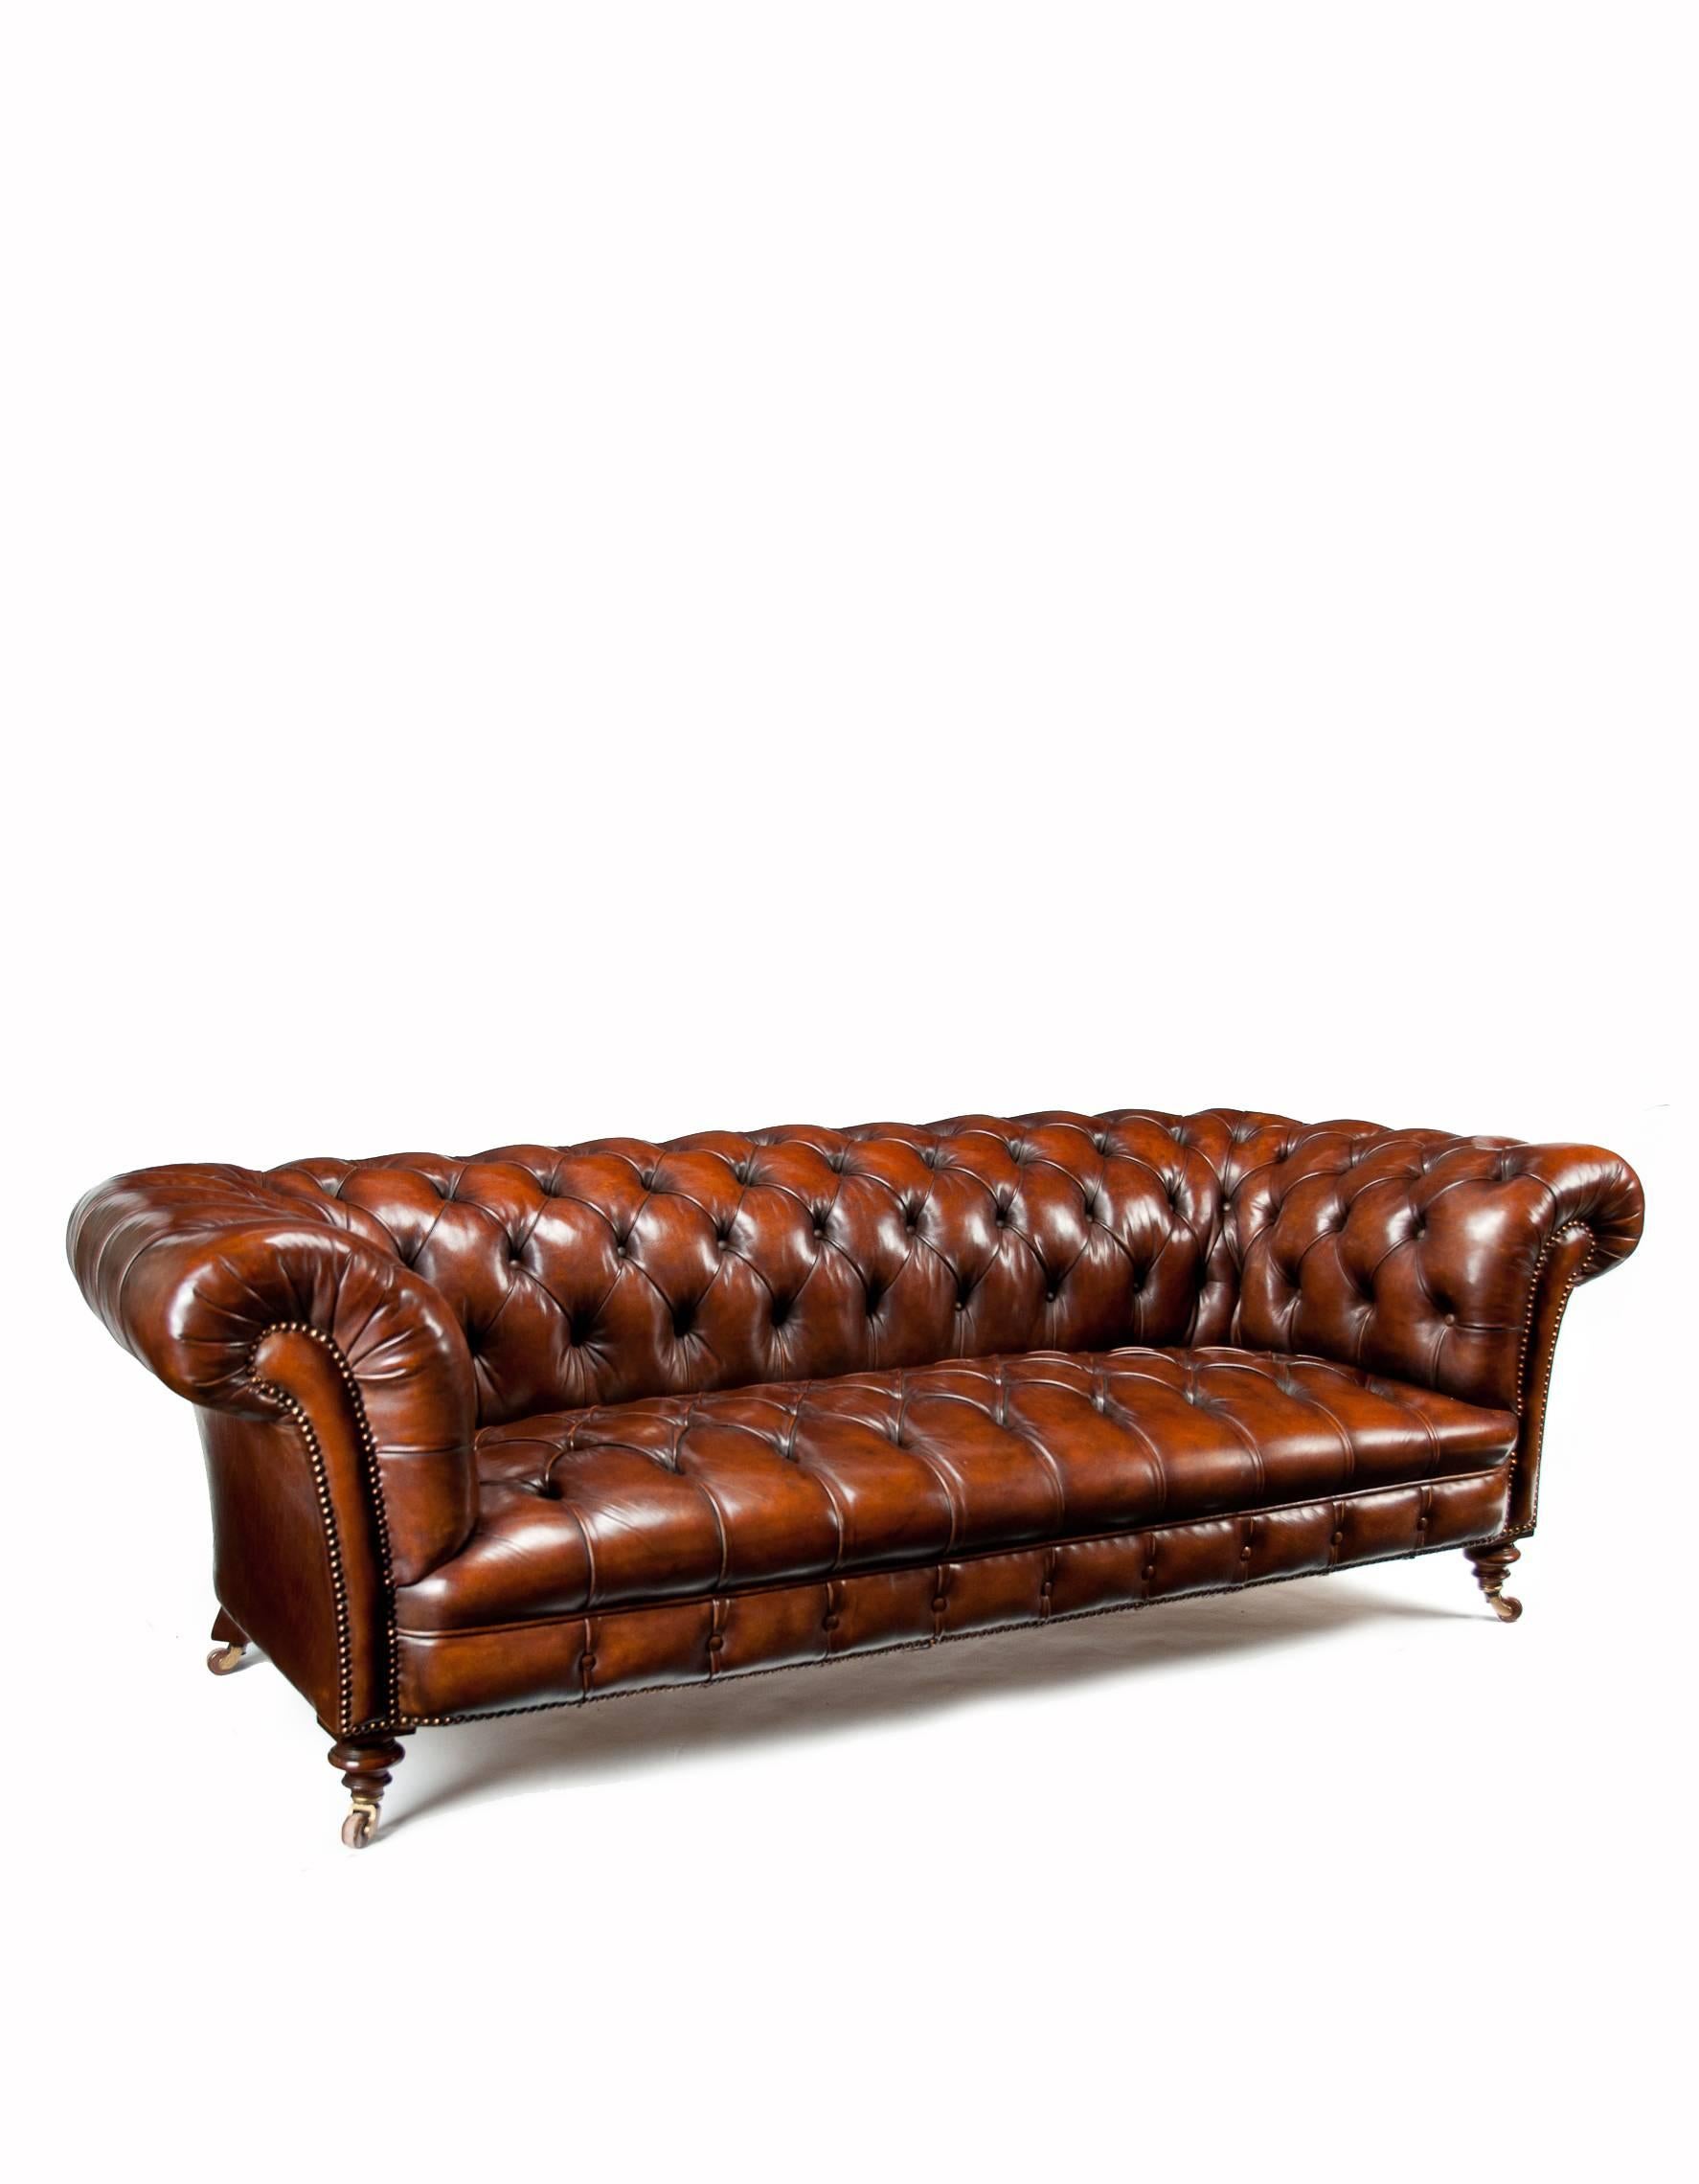 English Victorian James Jas Shoolbred Leather Walnut Chesterfield Fully Stamped